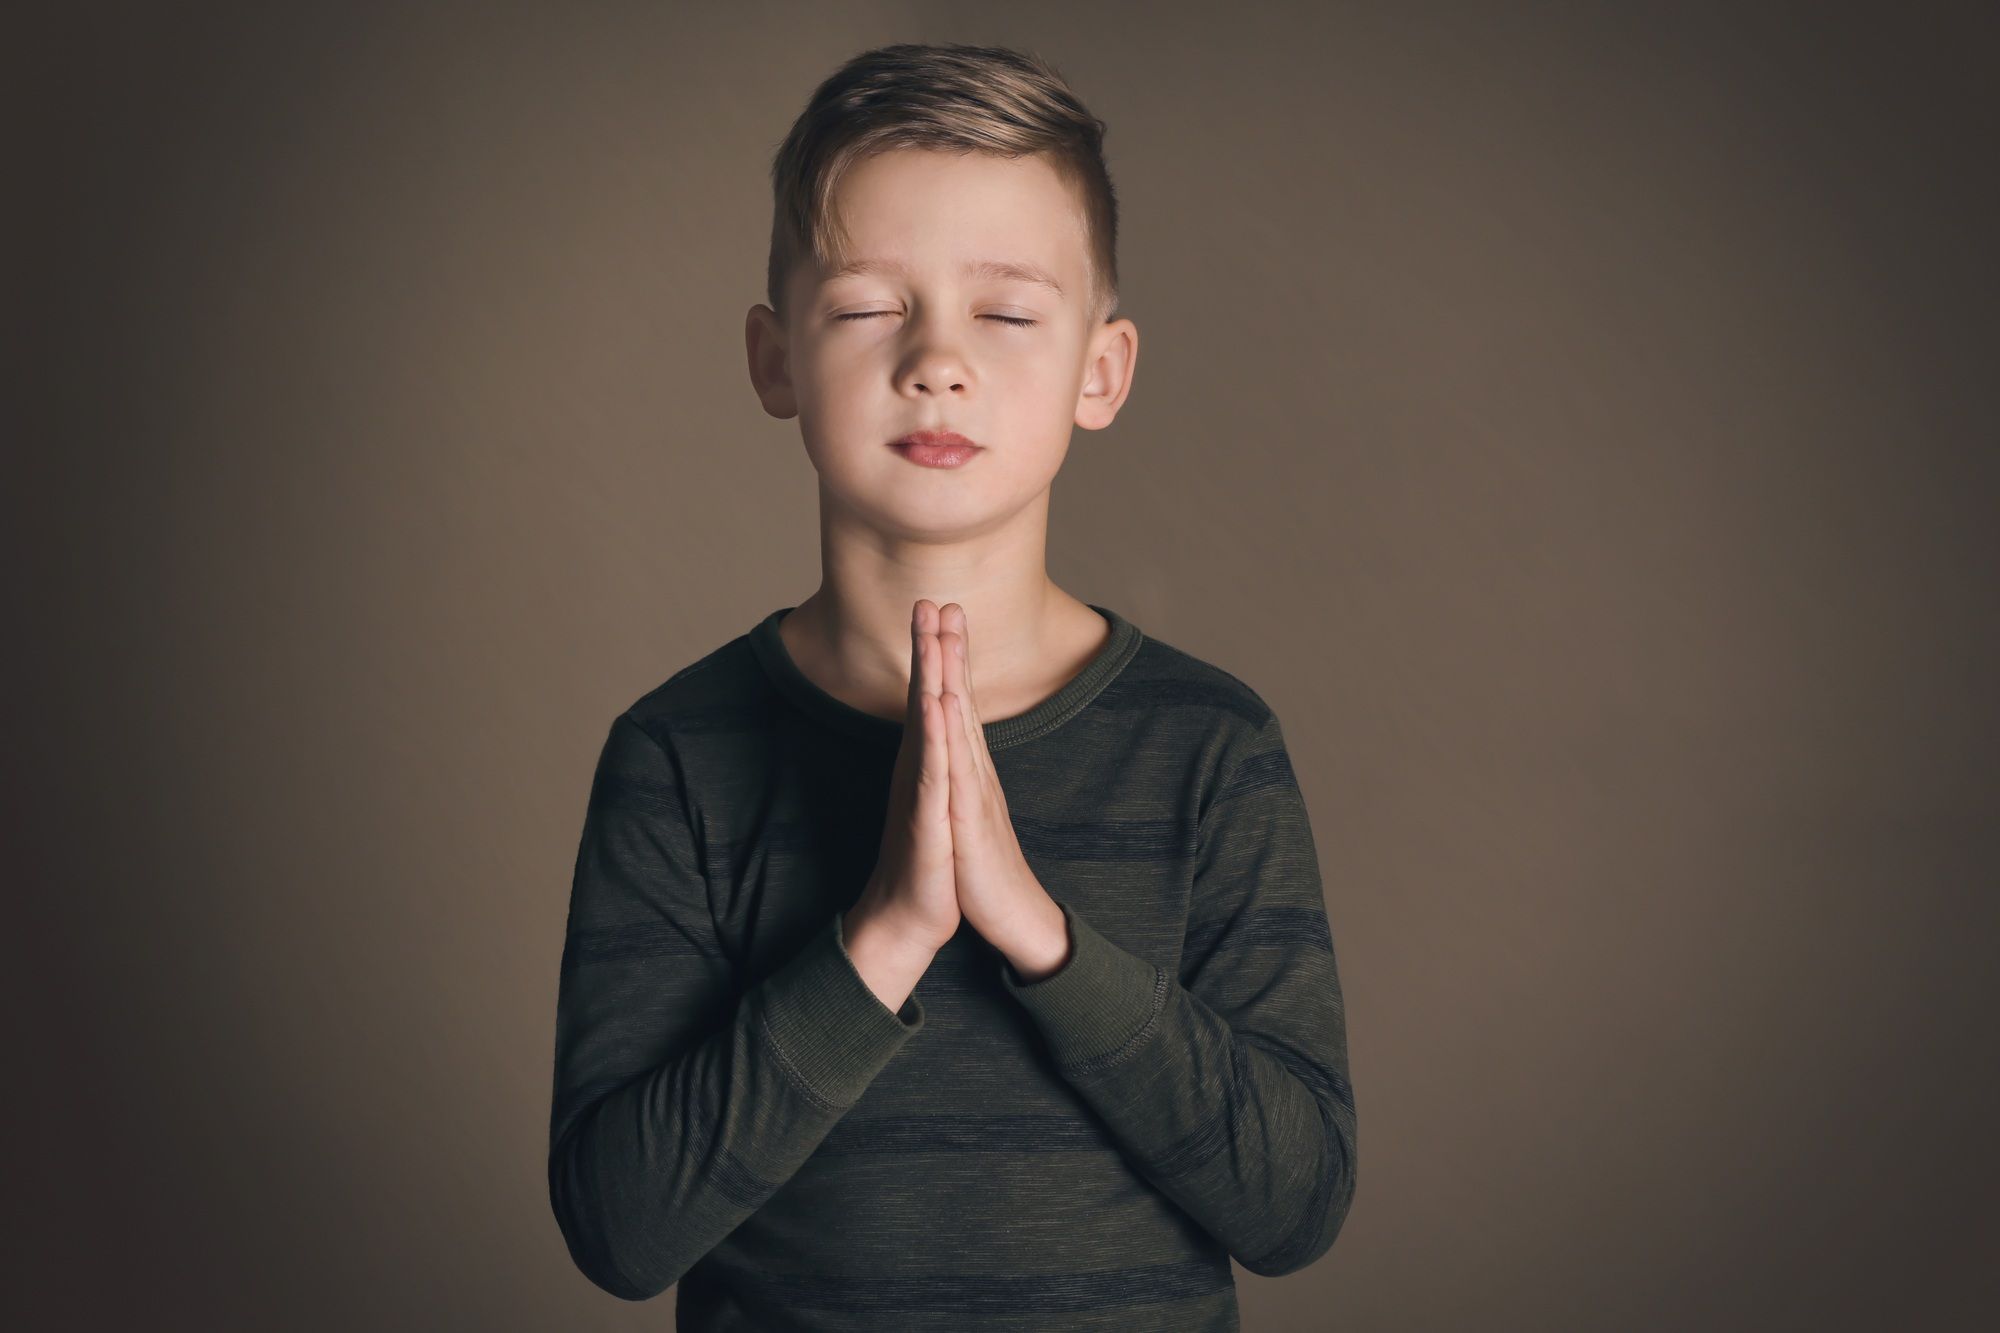 Young boy faces camera with eyes closed and hands folded in prayer